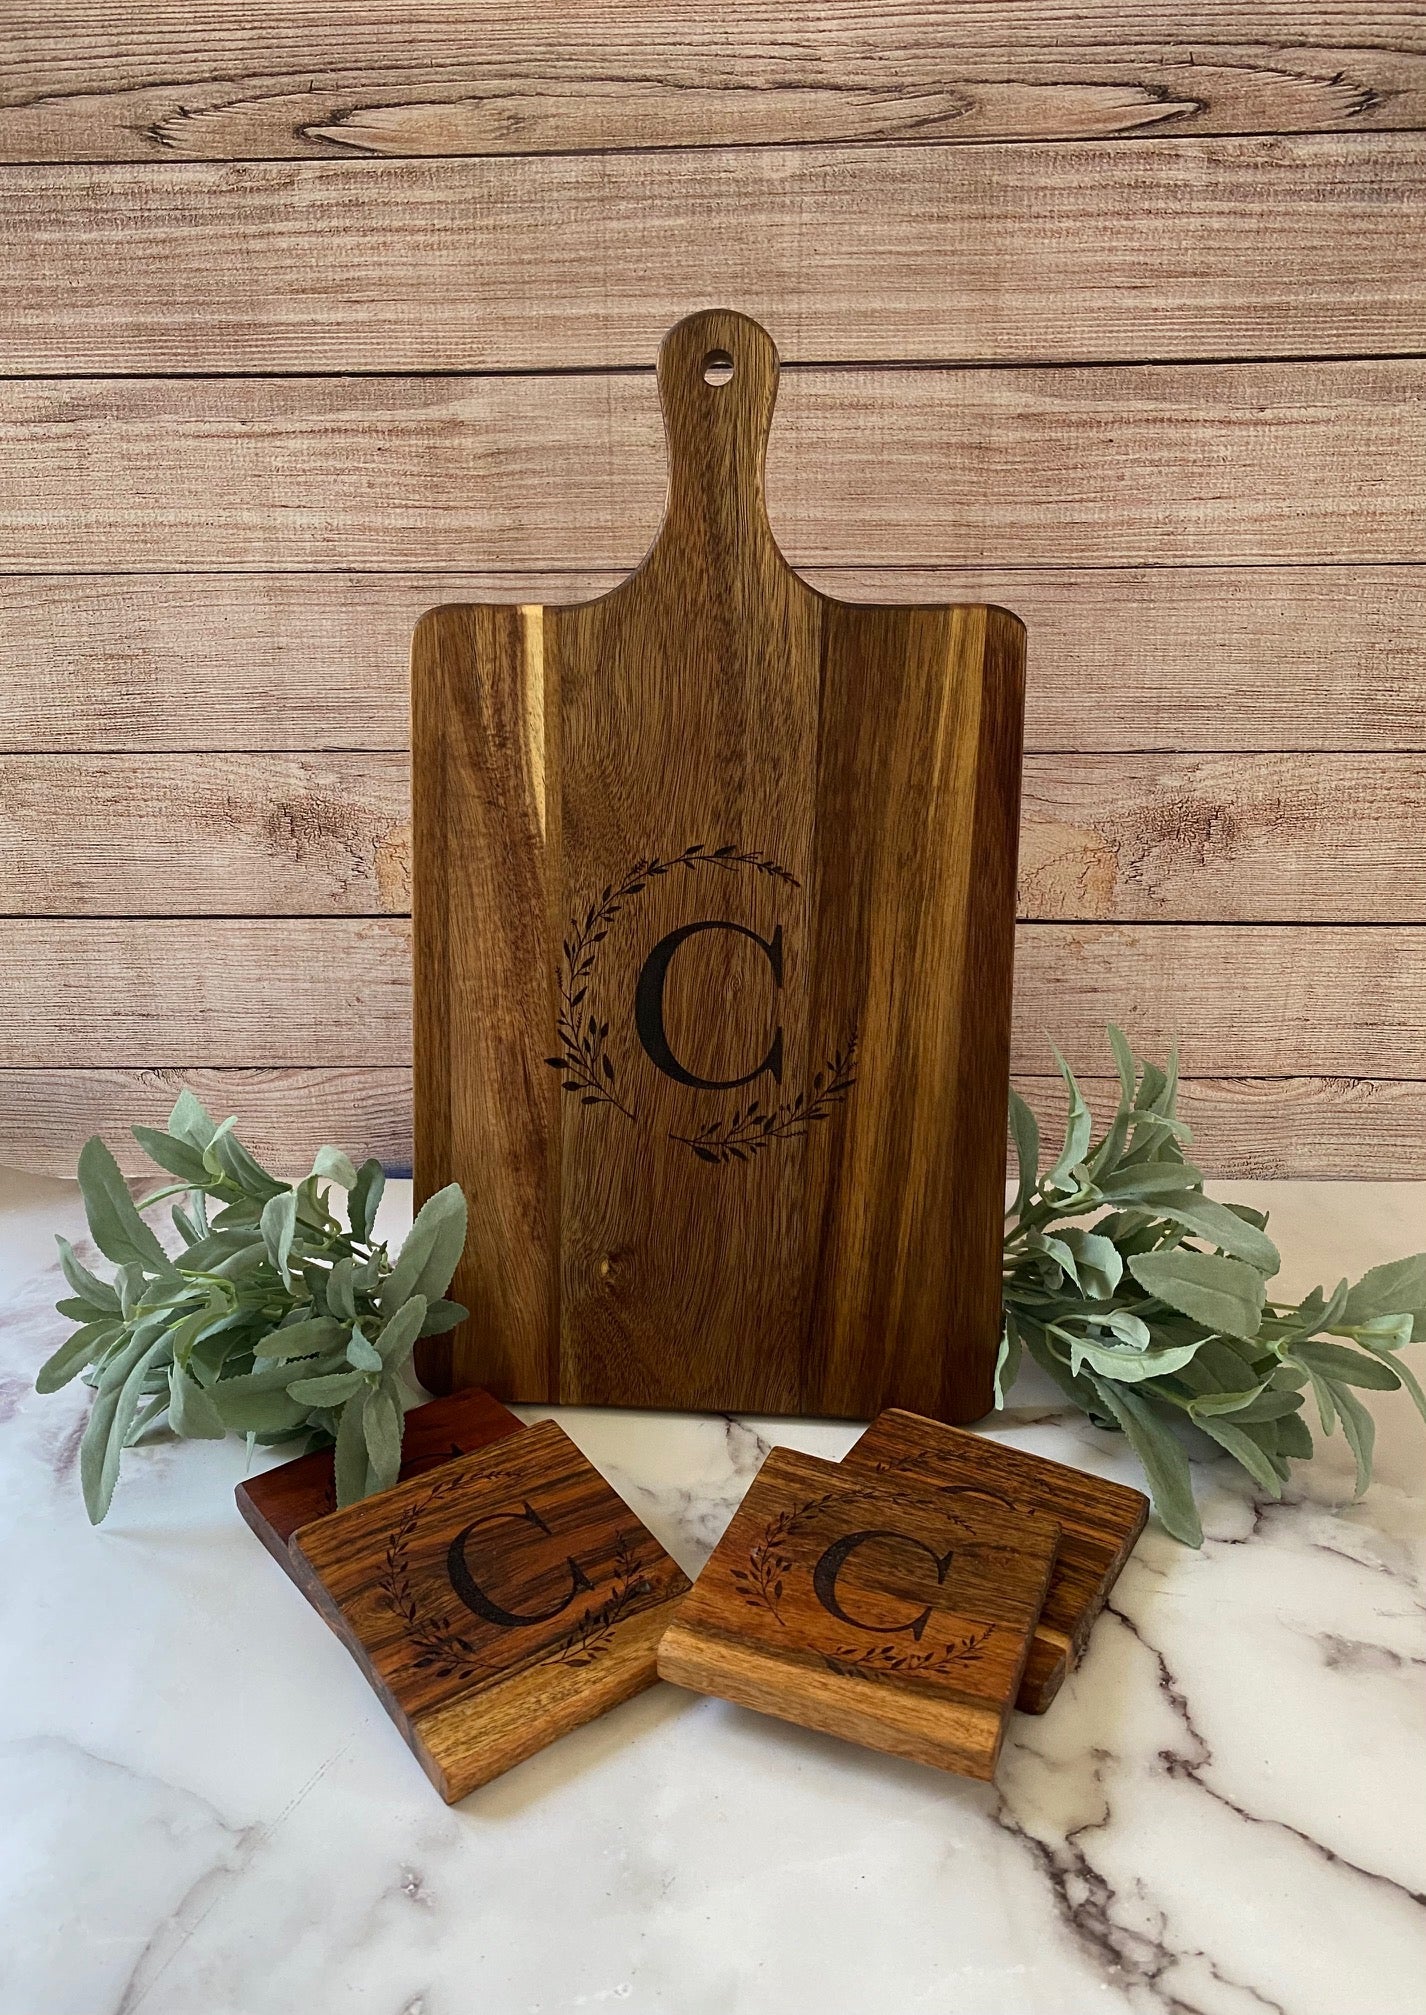 Personalized Rustic Wood Coaster Set